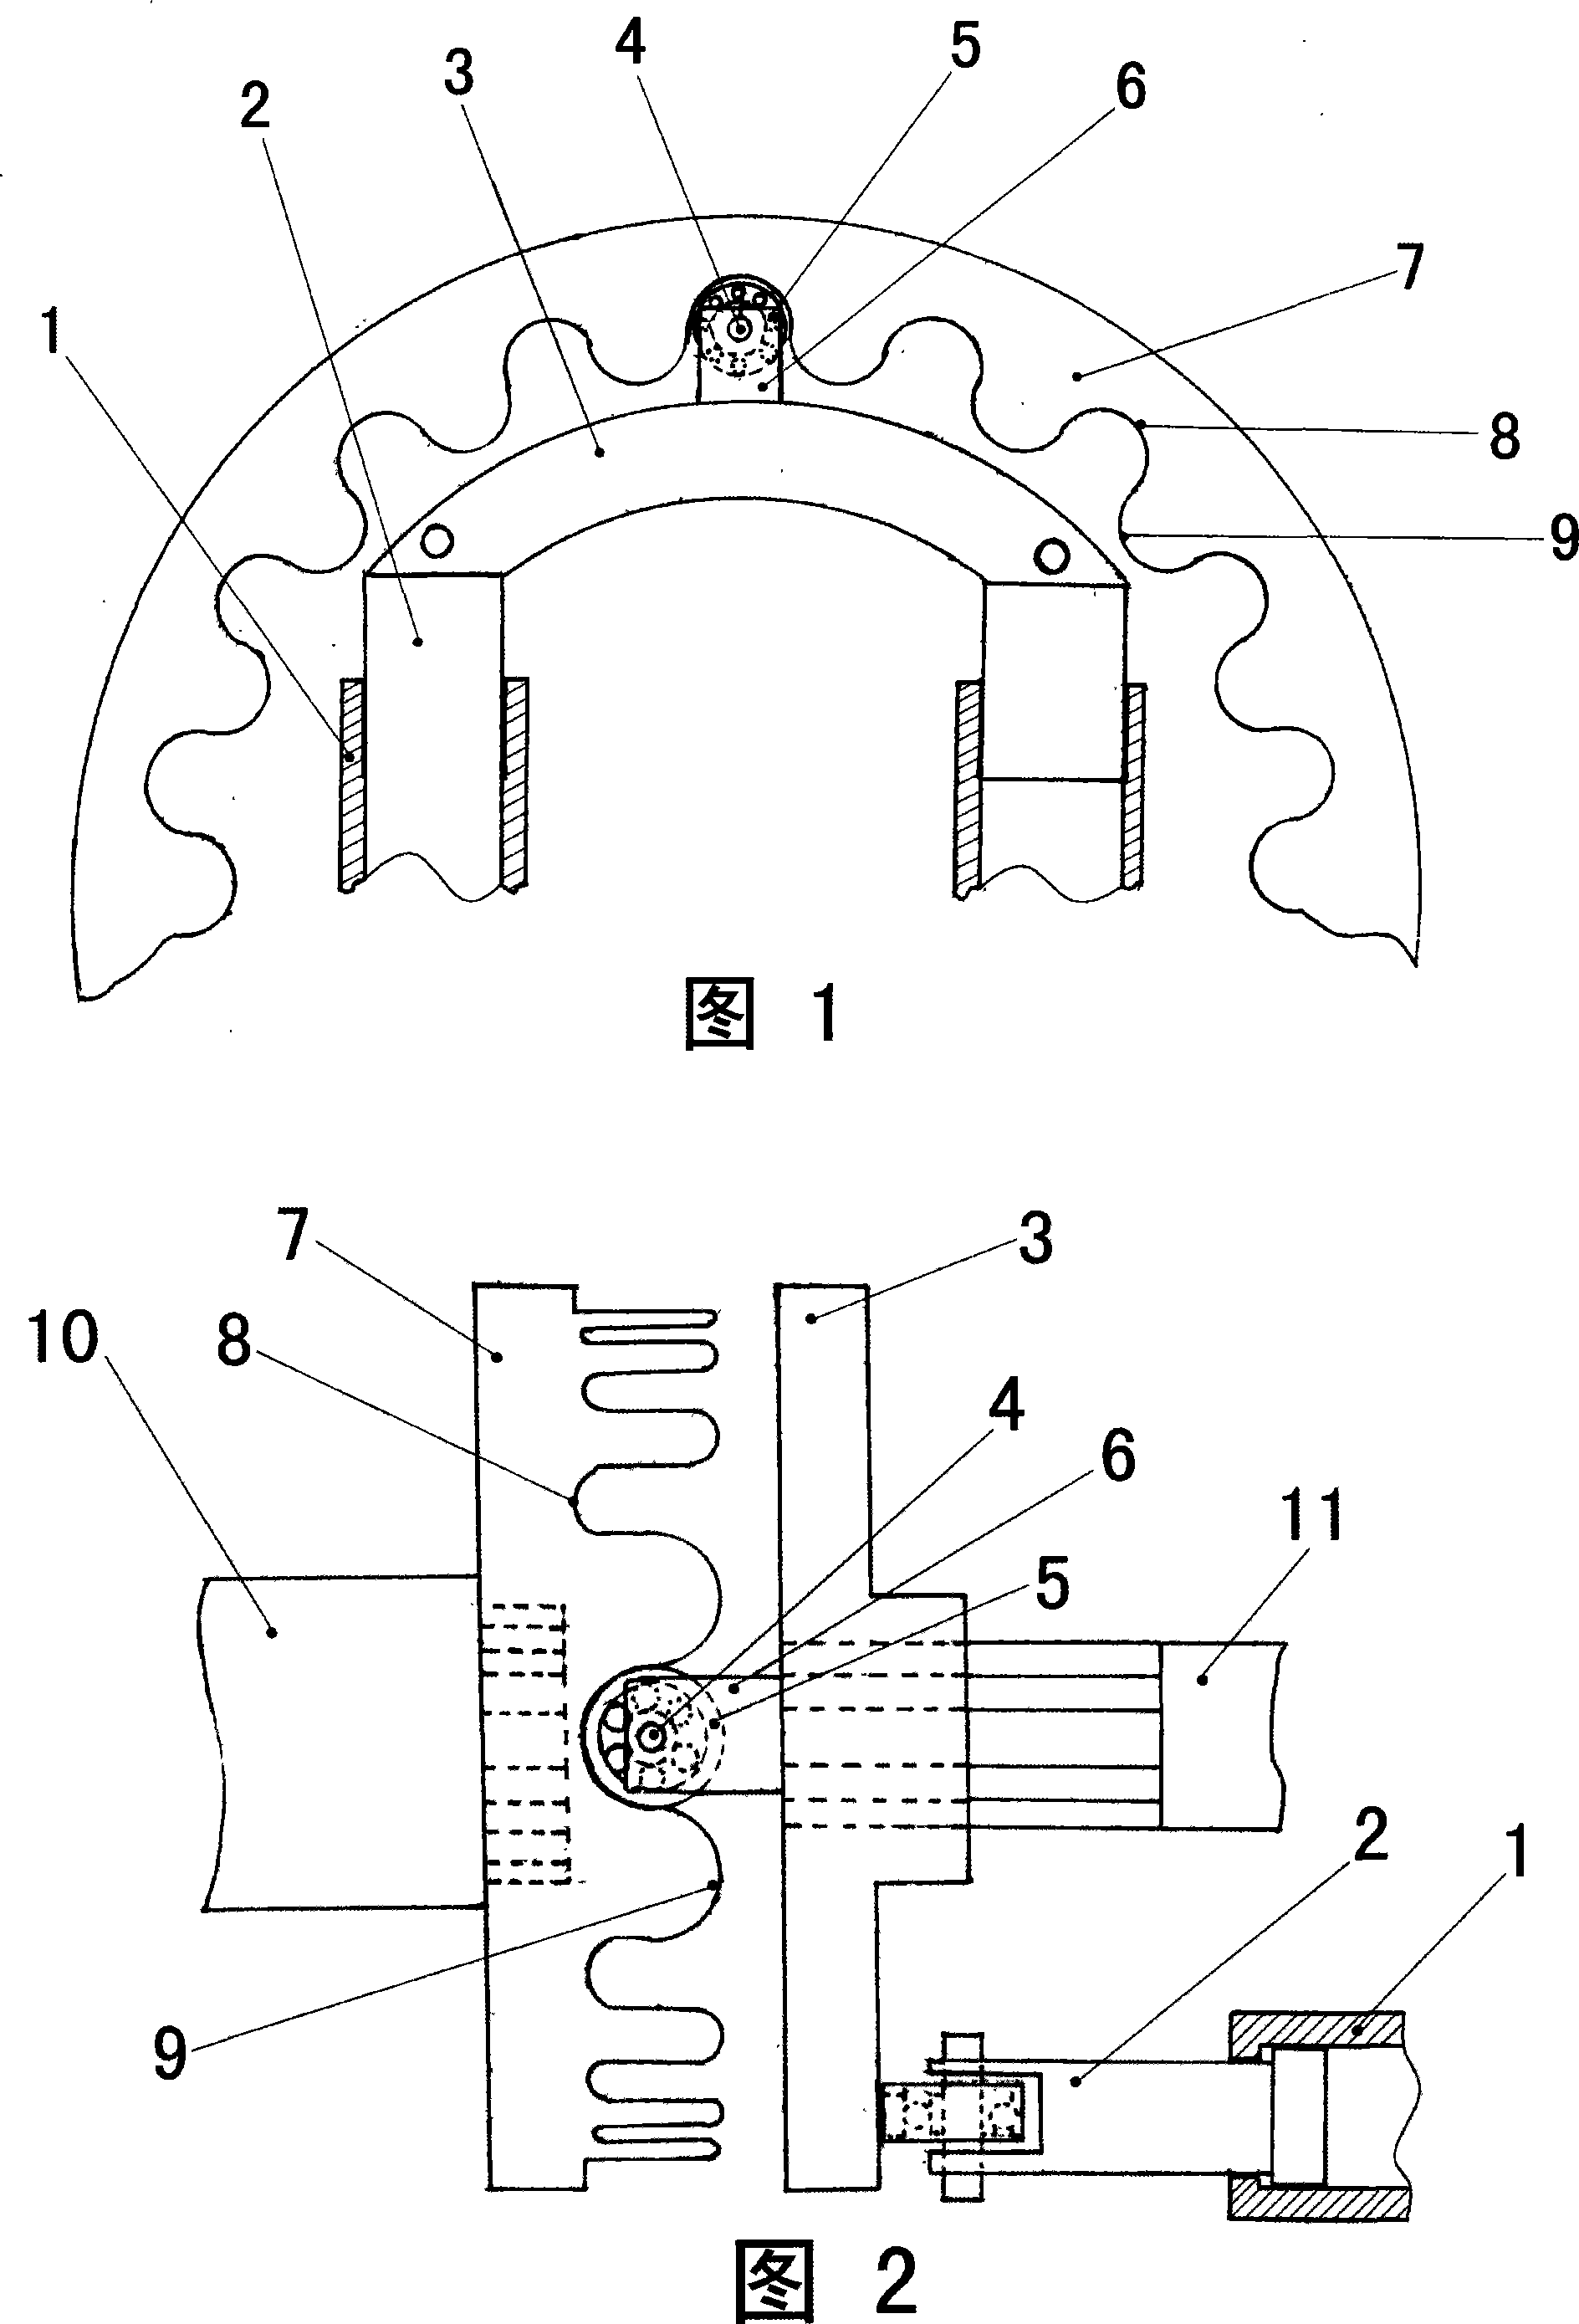 Apparatus for braking and linking convex and concave